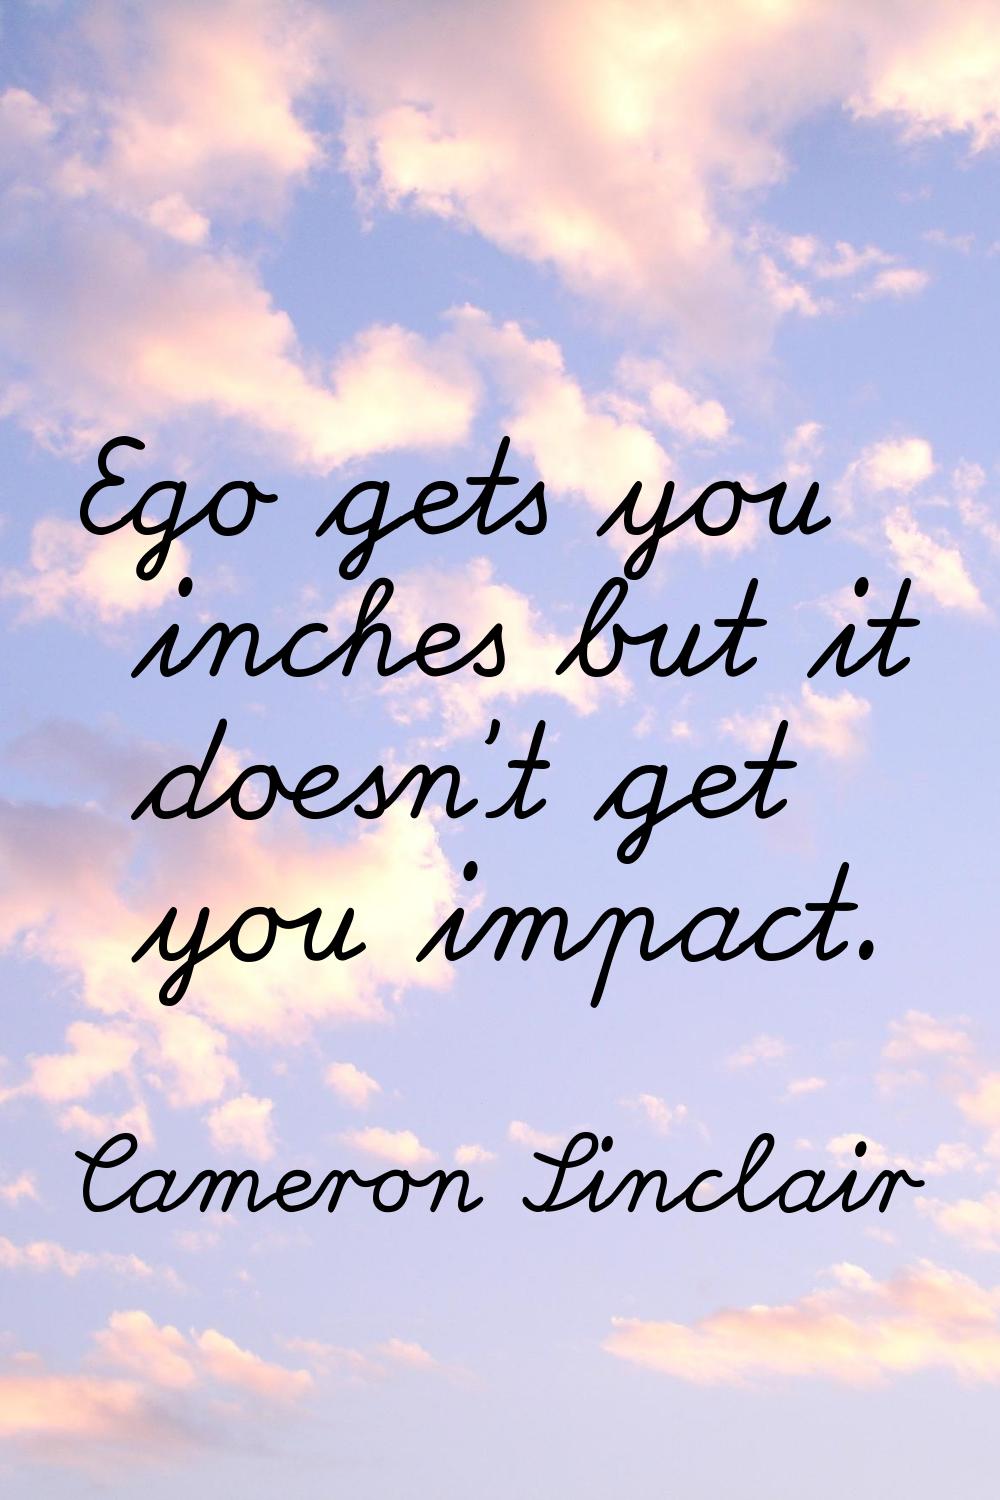 Ego gets you inches but it doesn't get you impact.